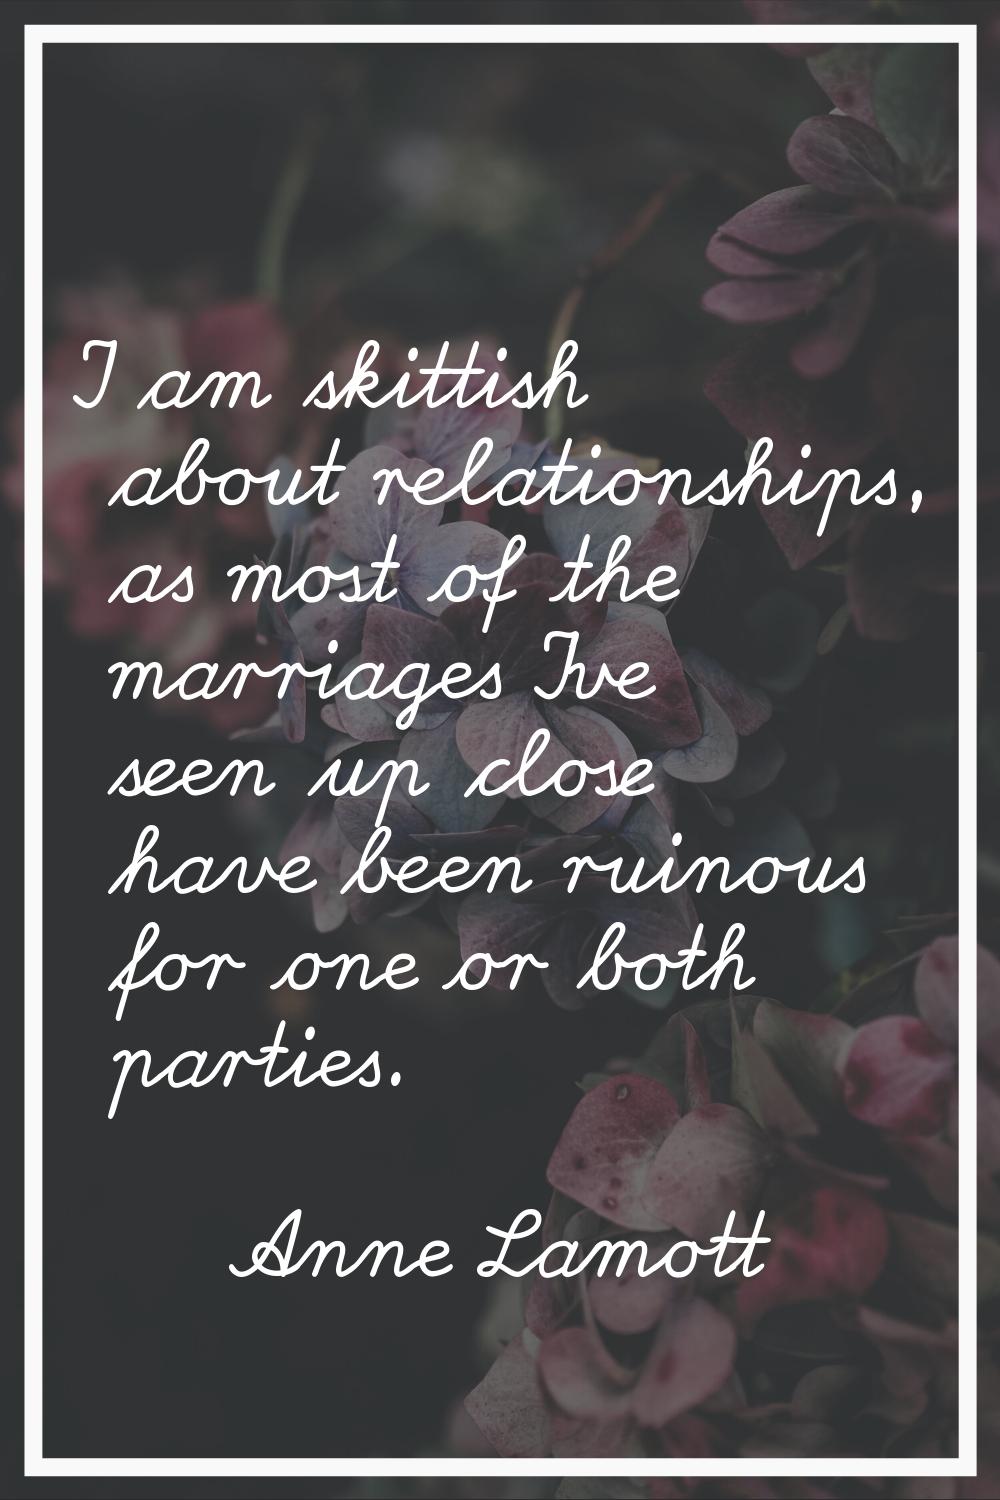 I am skittish about relationships, as most of the marriages I've seen up close have been ruinous fo